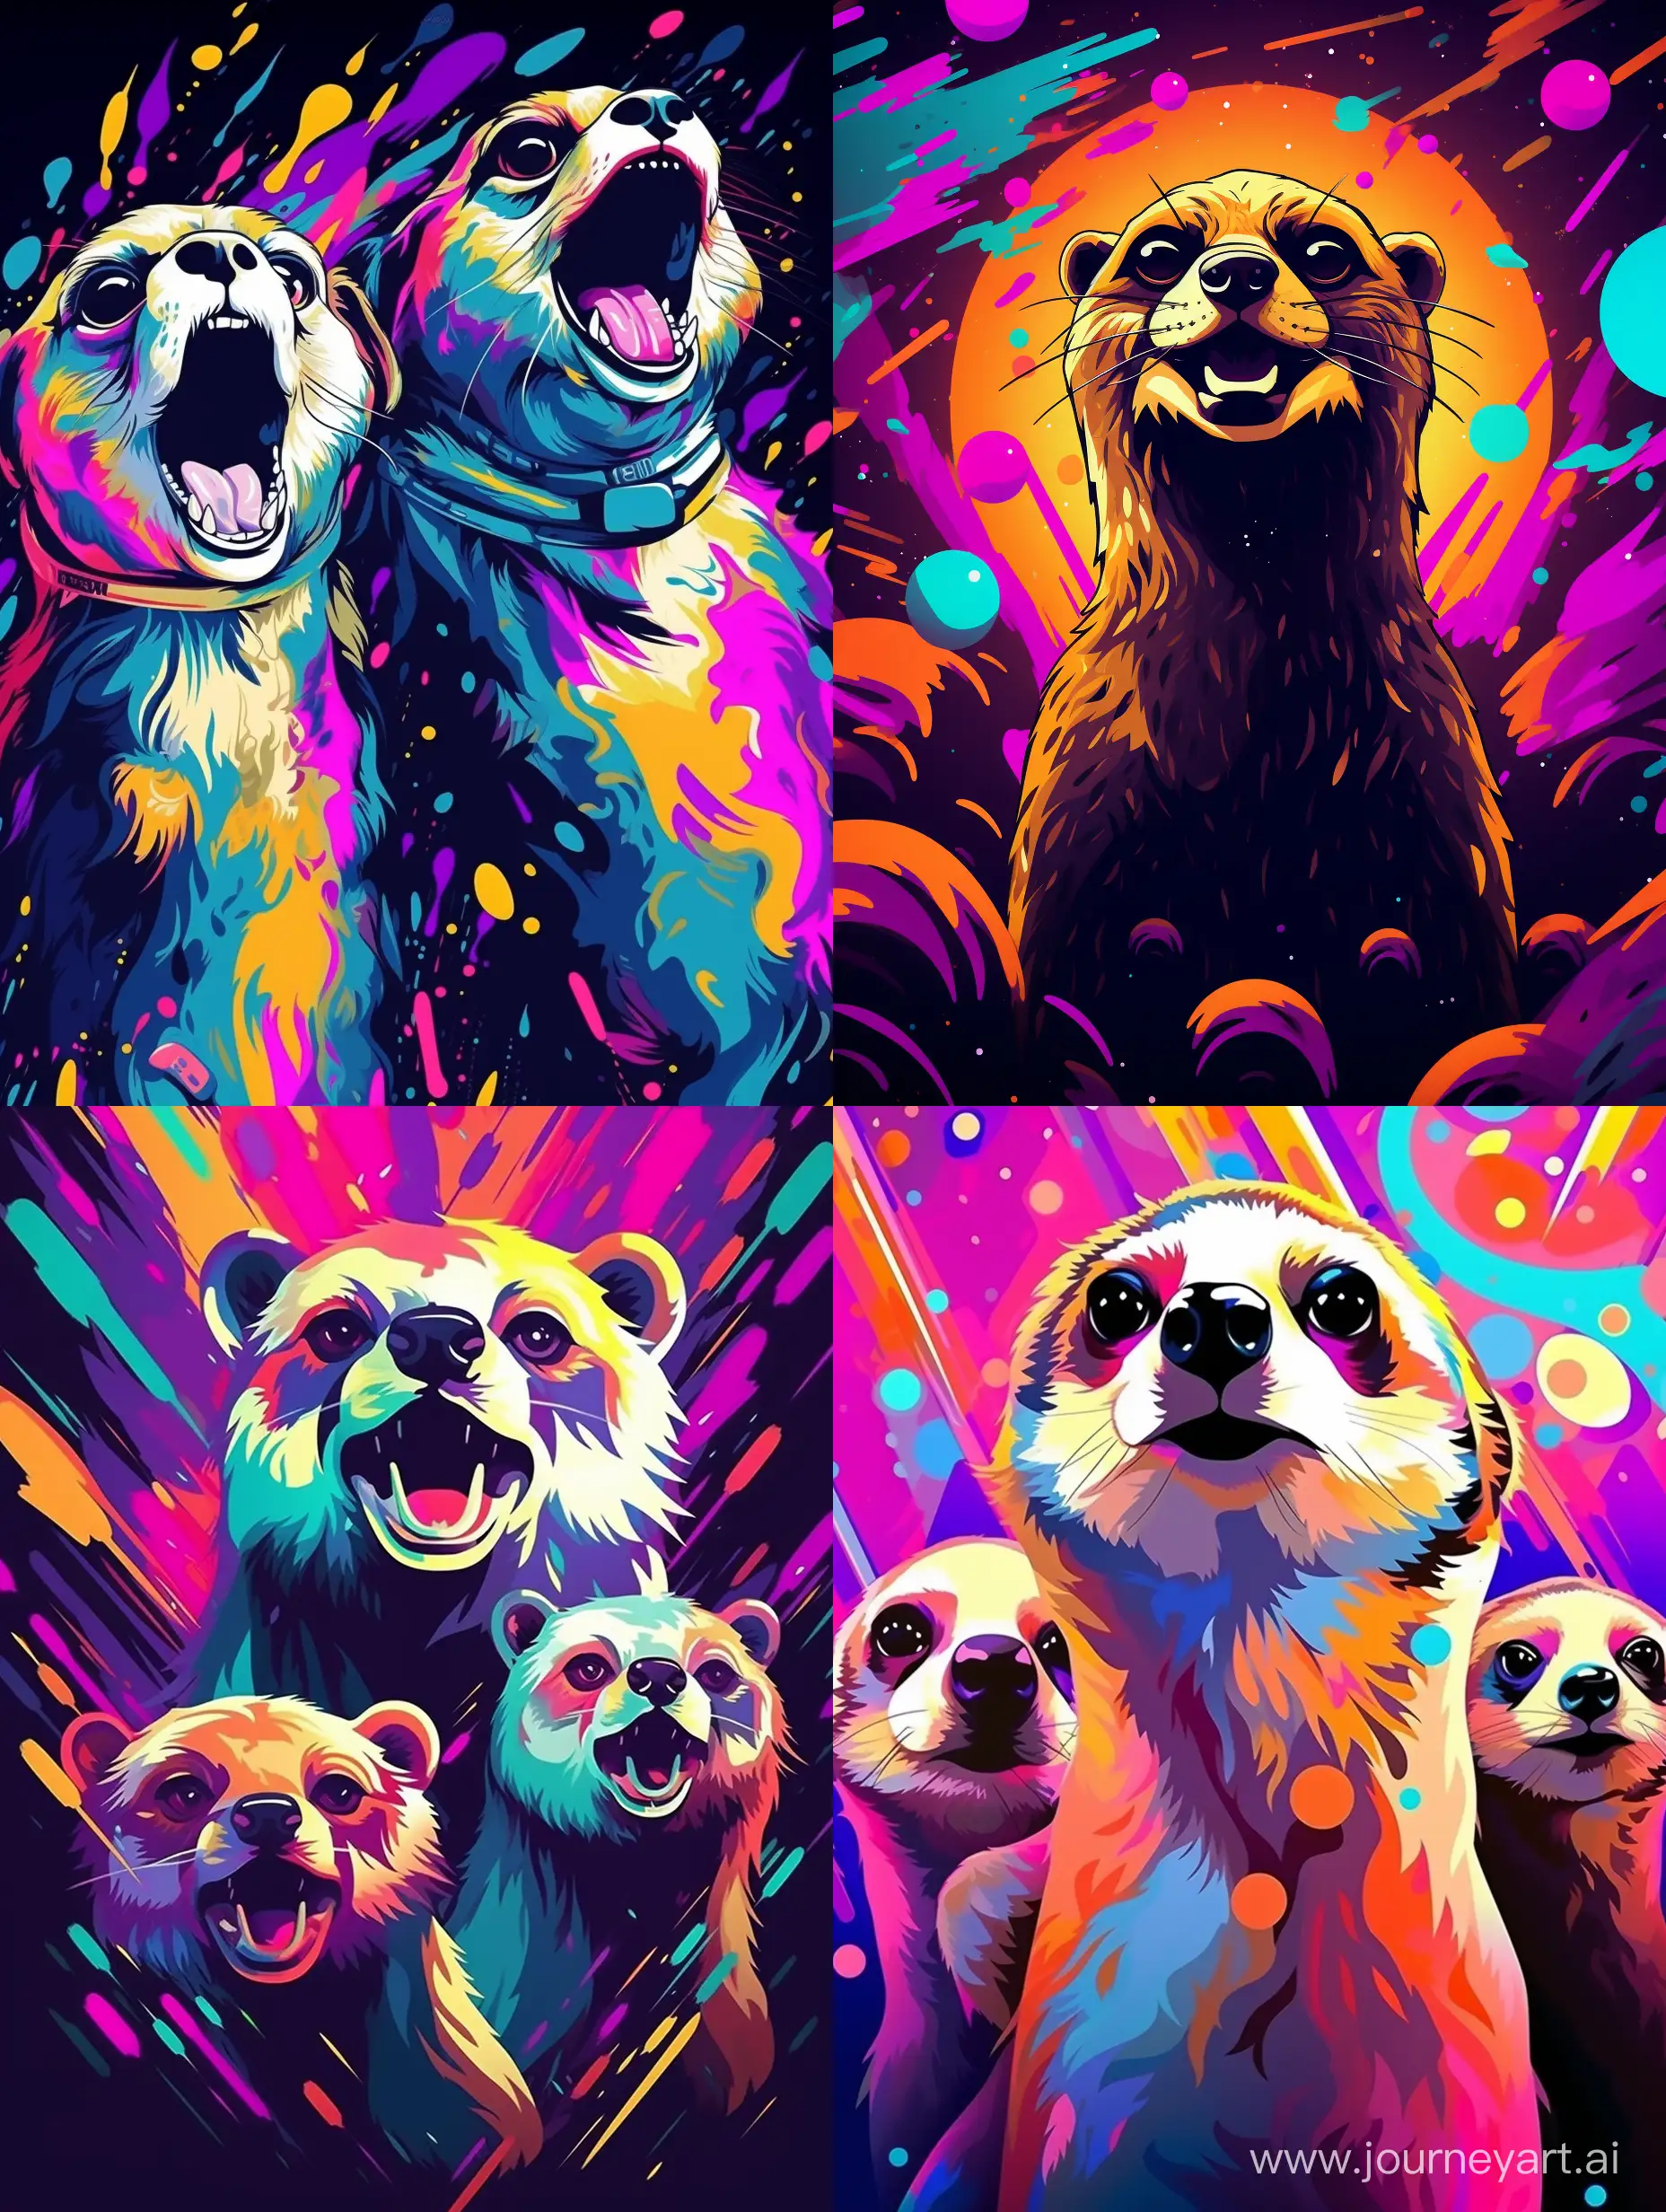 Funky Modern Crazy Expression Meerkats. Full Body Image. Trippy Meerkats with Golden Teeth. Cosmic Radiant Background. Flat Vector Art. High Resolution NTF Crypto Graphic. 